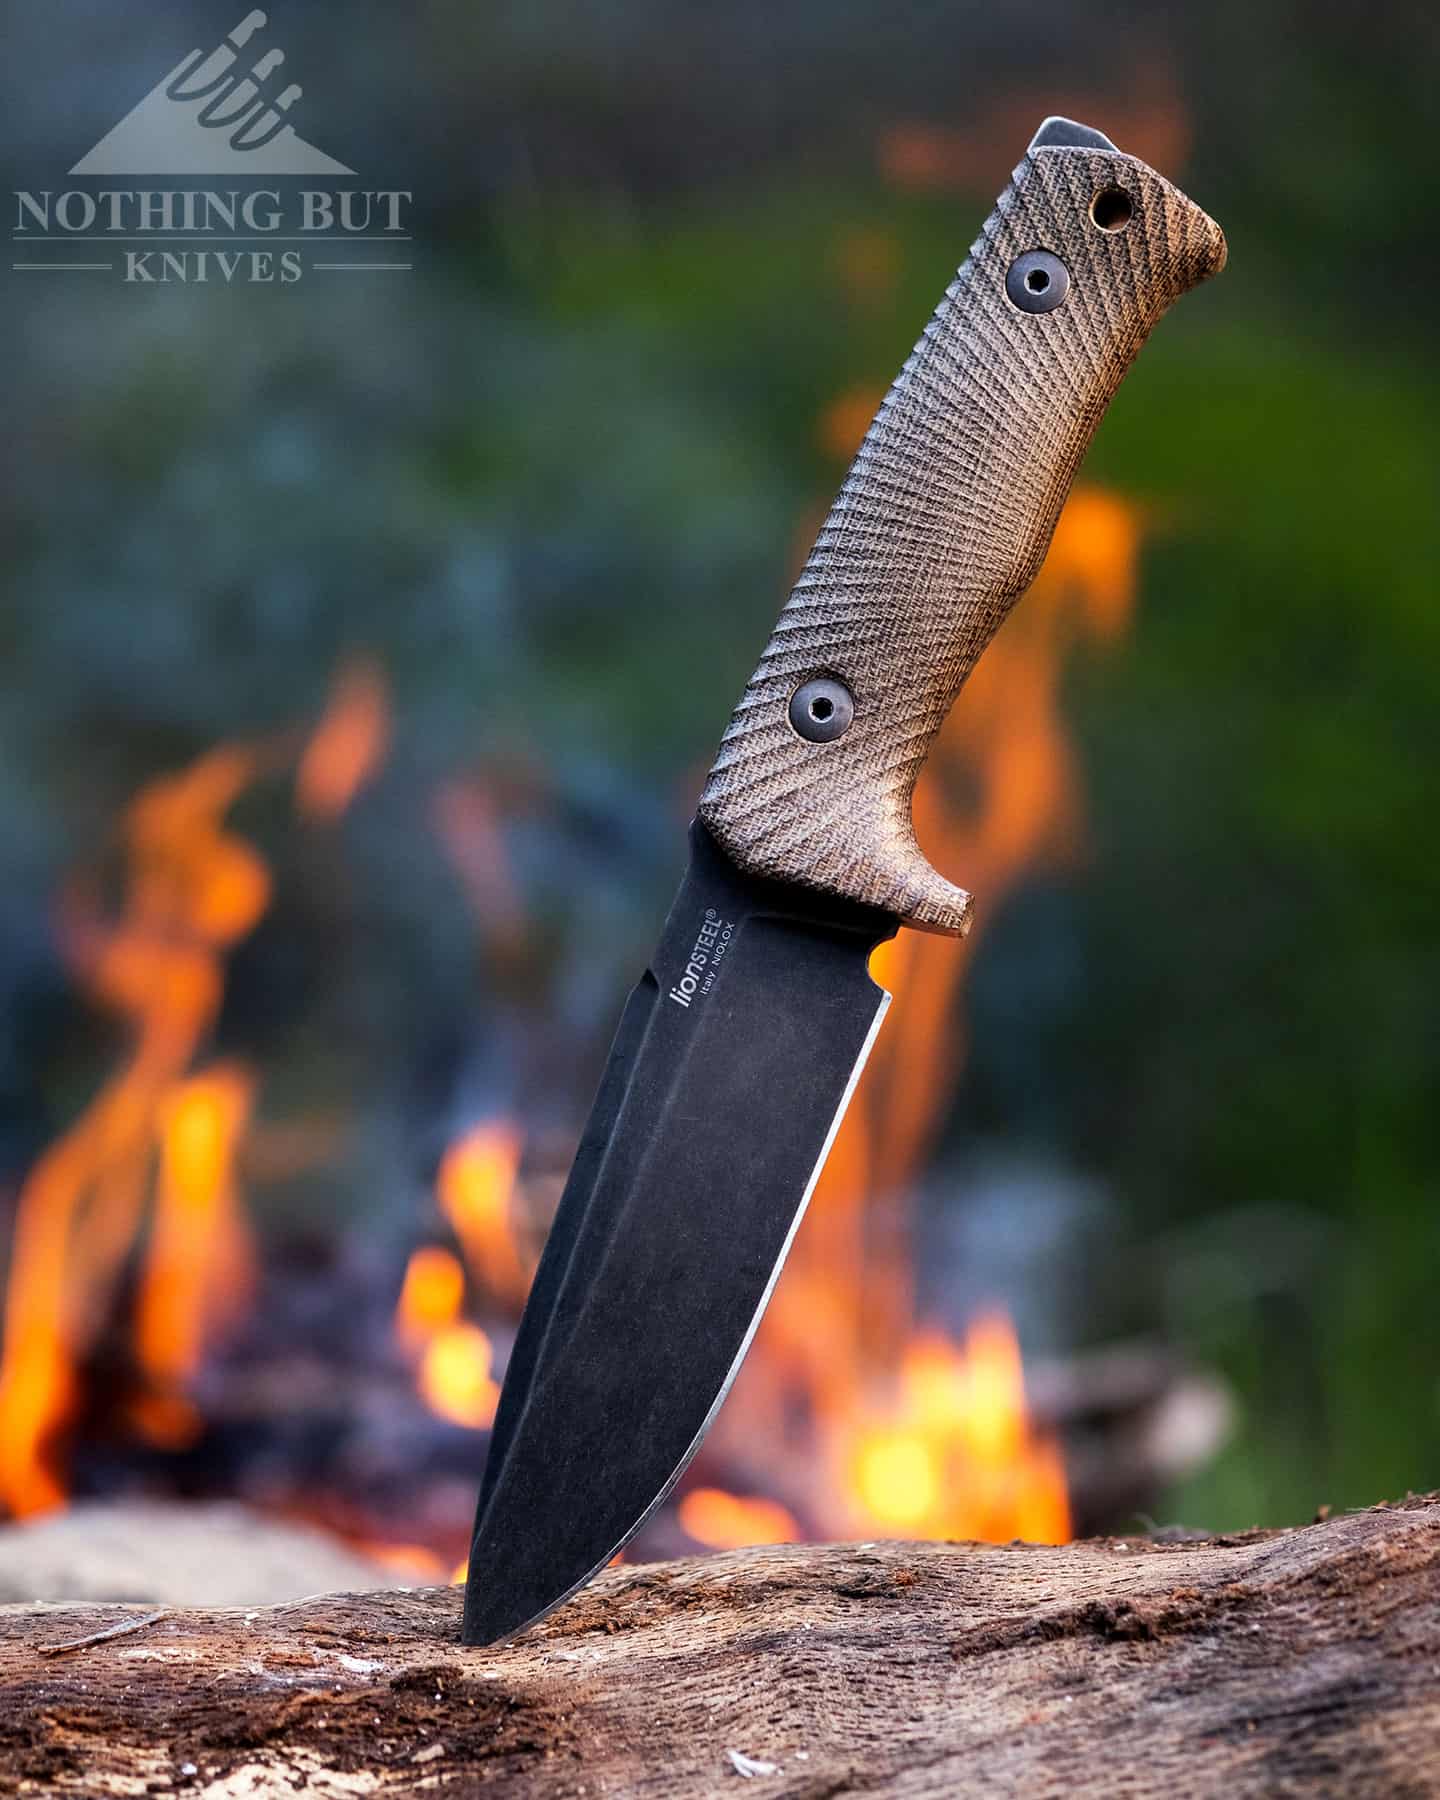 LionSteel did some nice work on the niolox steel of the T5, and the single-piece-Micarta handle is a welcome innovation.